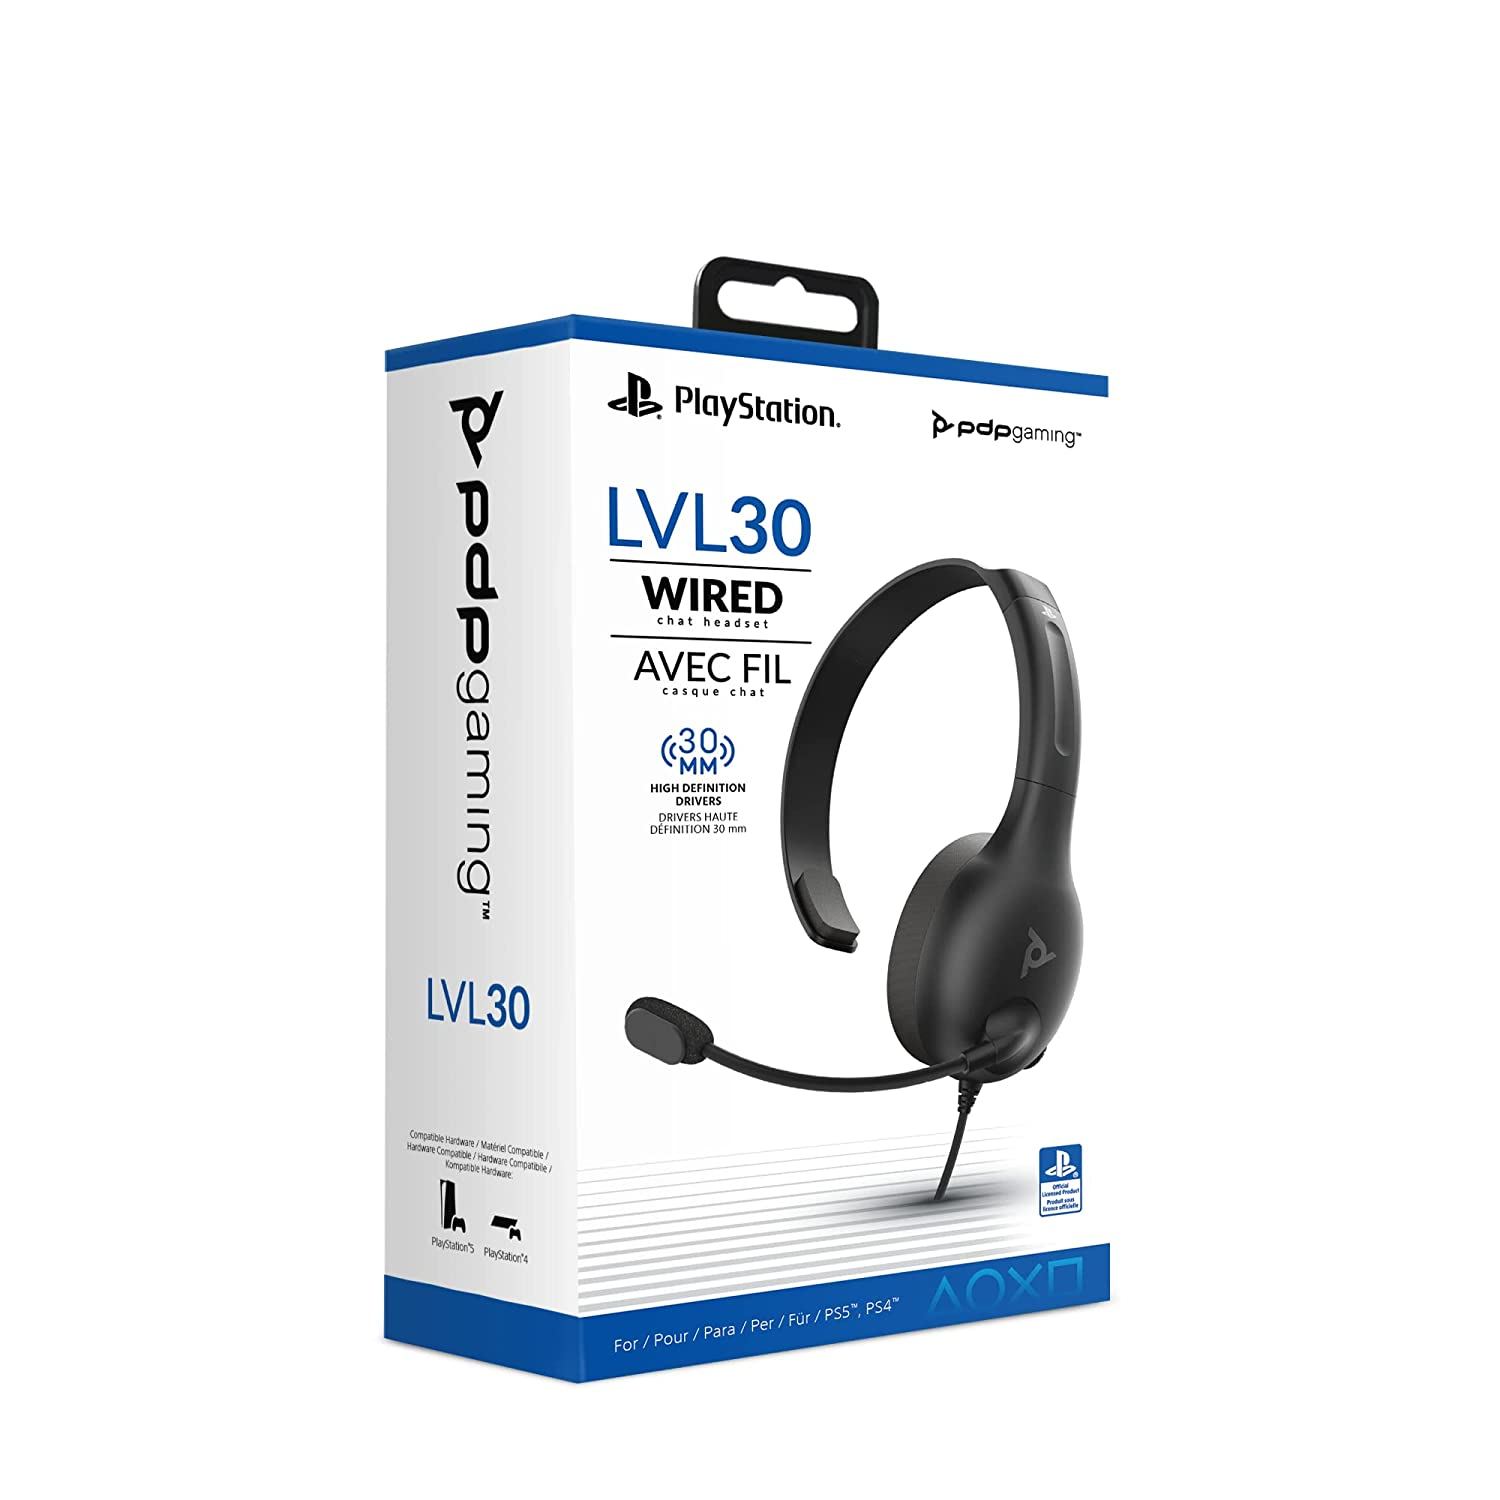 Pdp Gaming Lvl30 Wired Chat Headset - Playstation